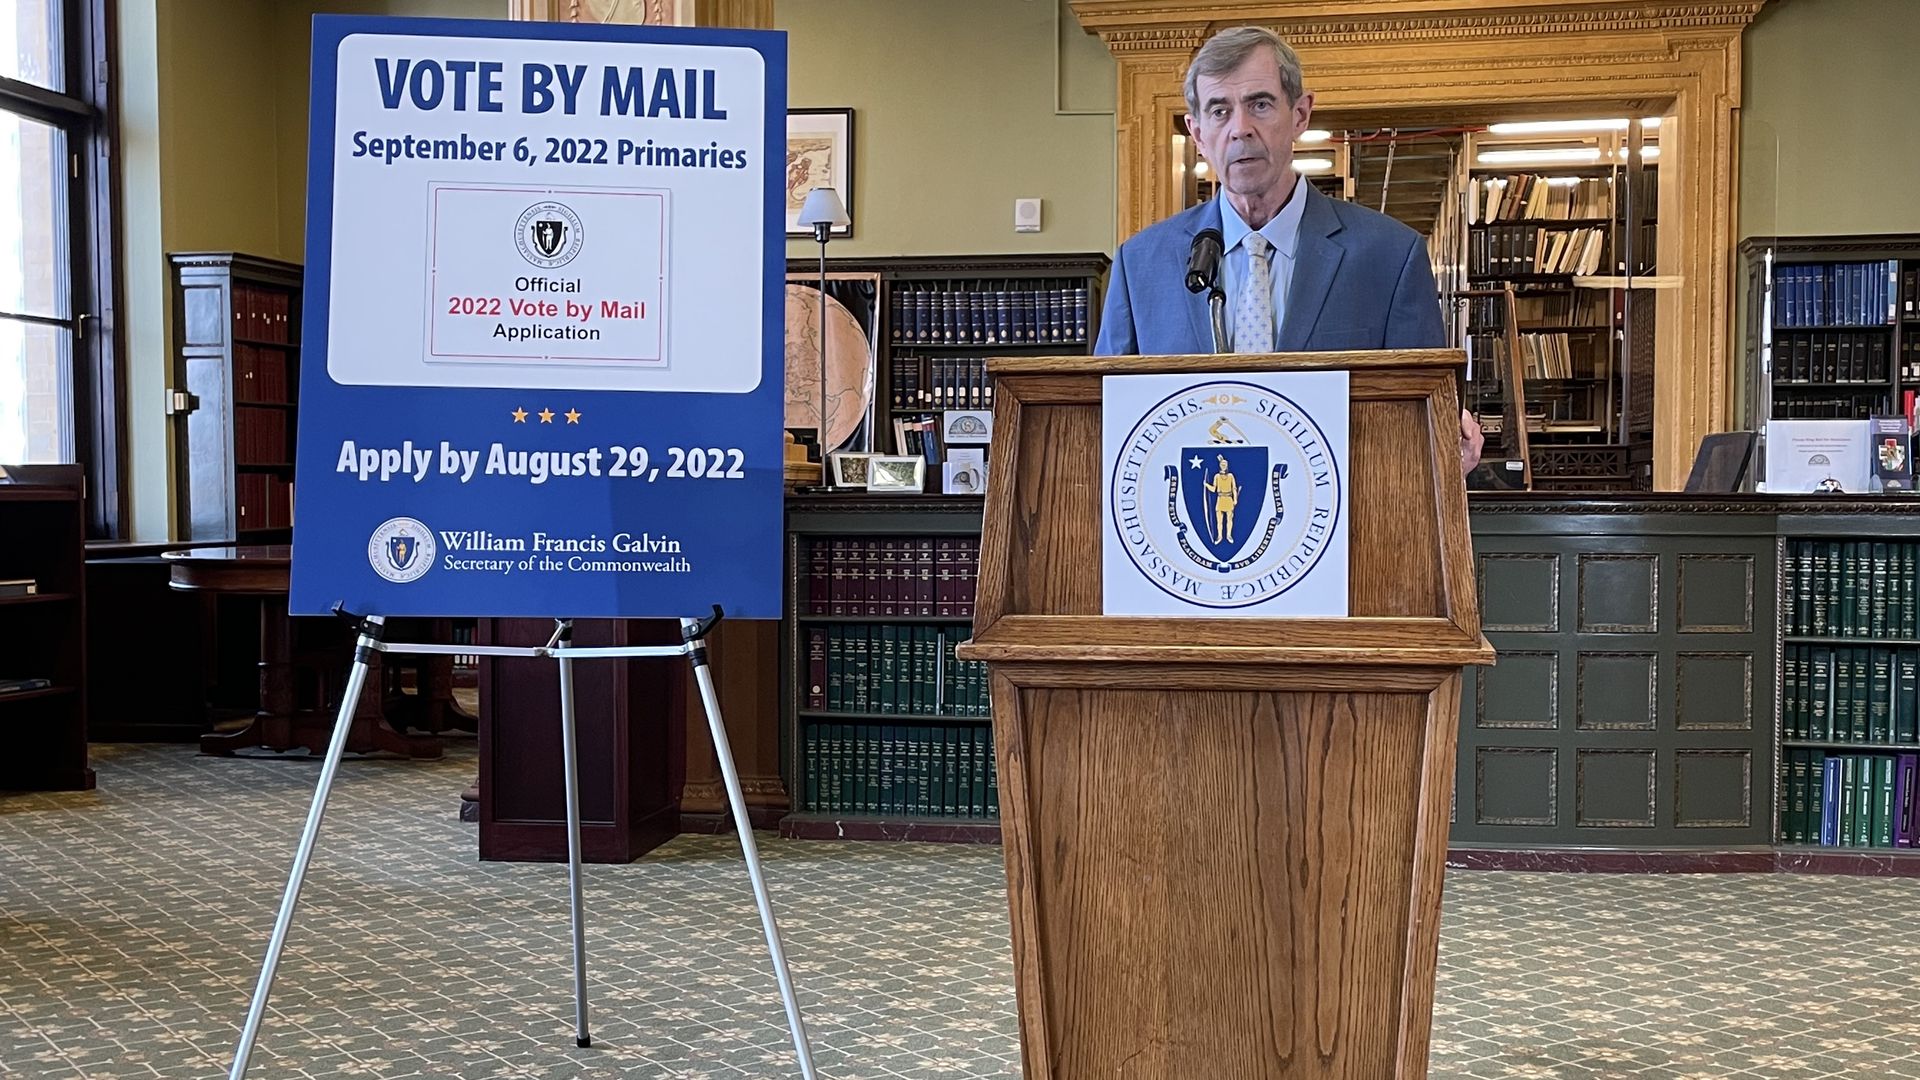 Secretary of State Bill Galvin stands behind a wooden podium next to a large blue and white "vote by mail" sign in the state library.